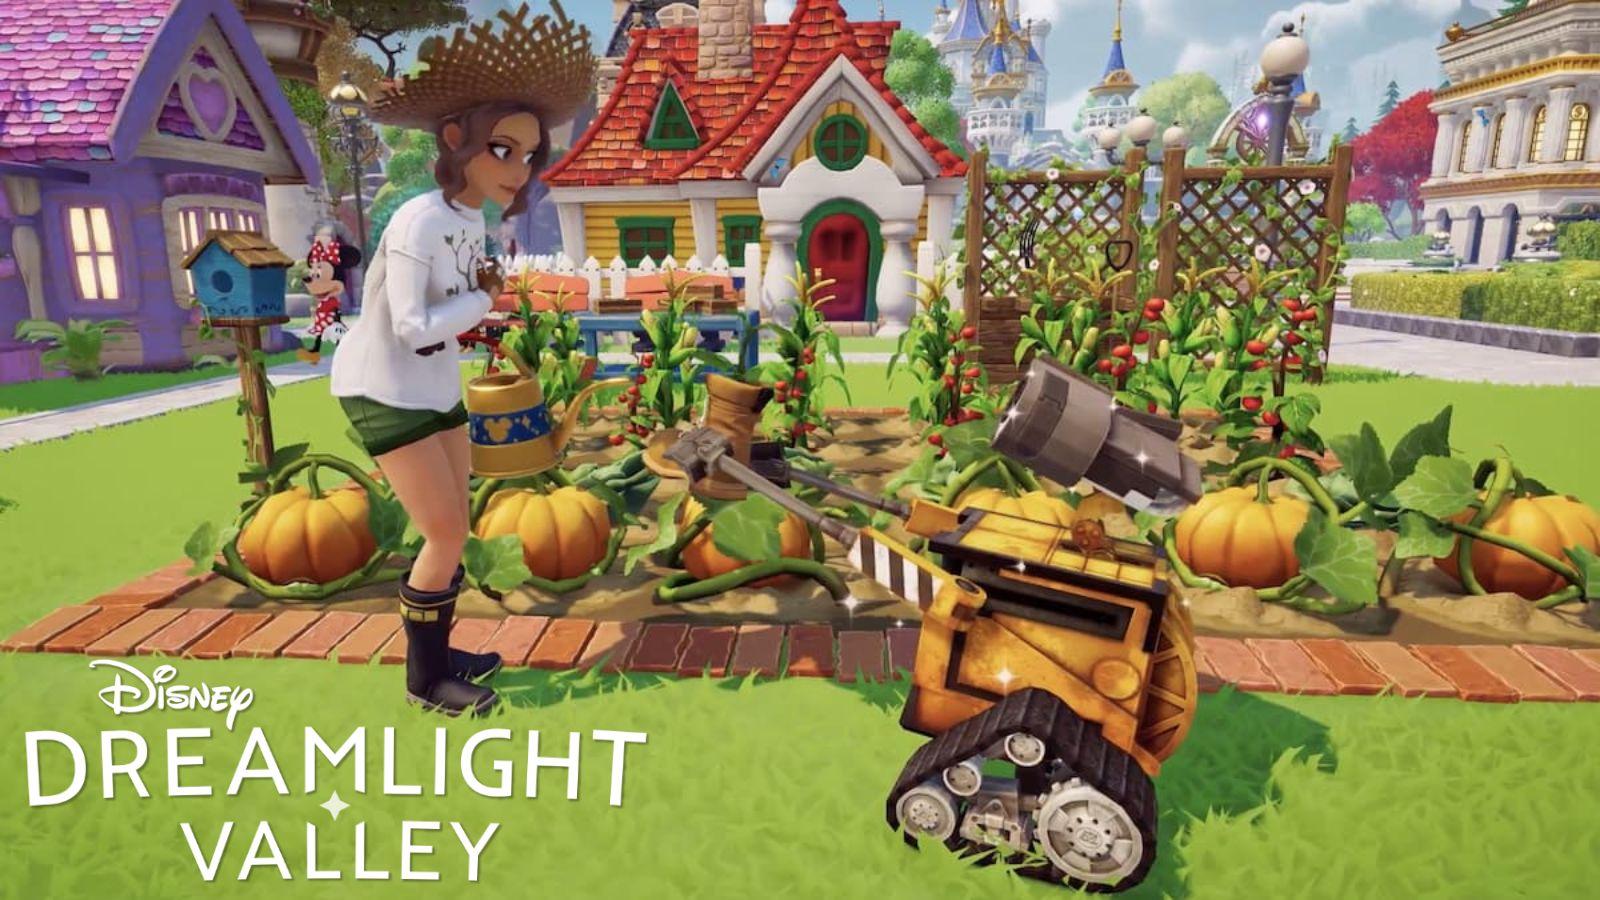 Disney Dreamlight Valley crop growth times, locations & sell price